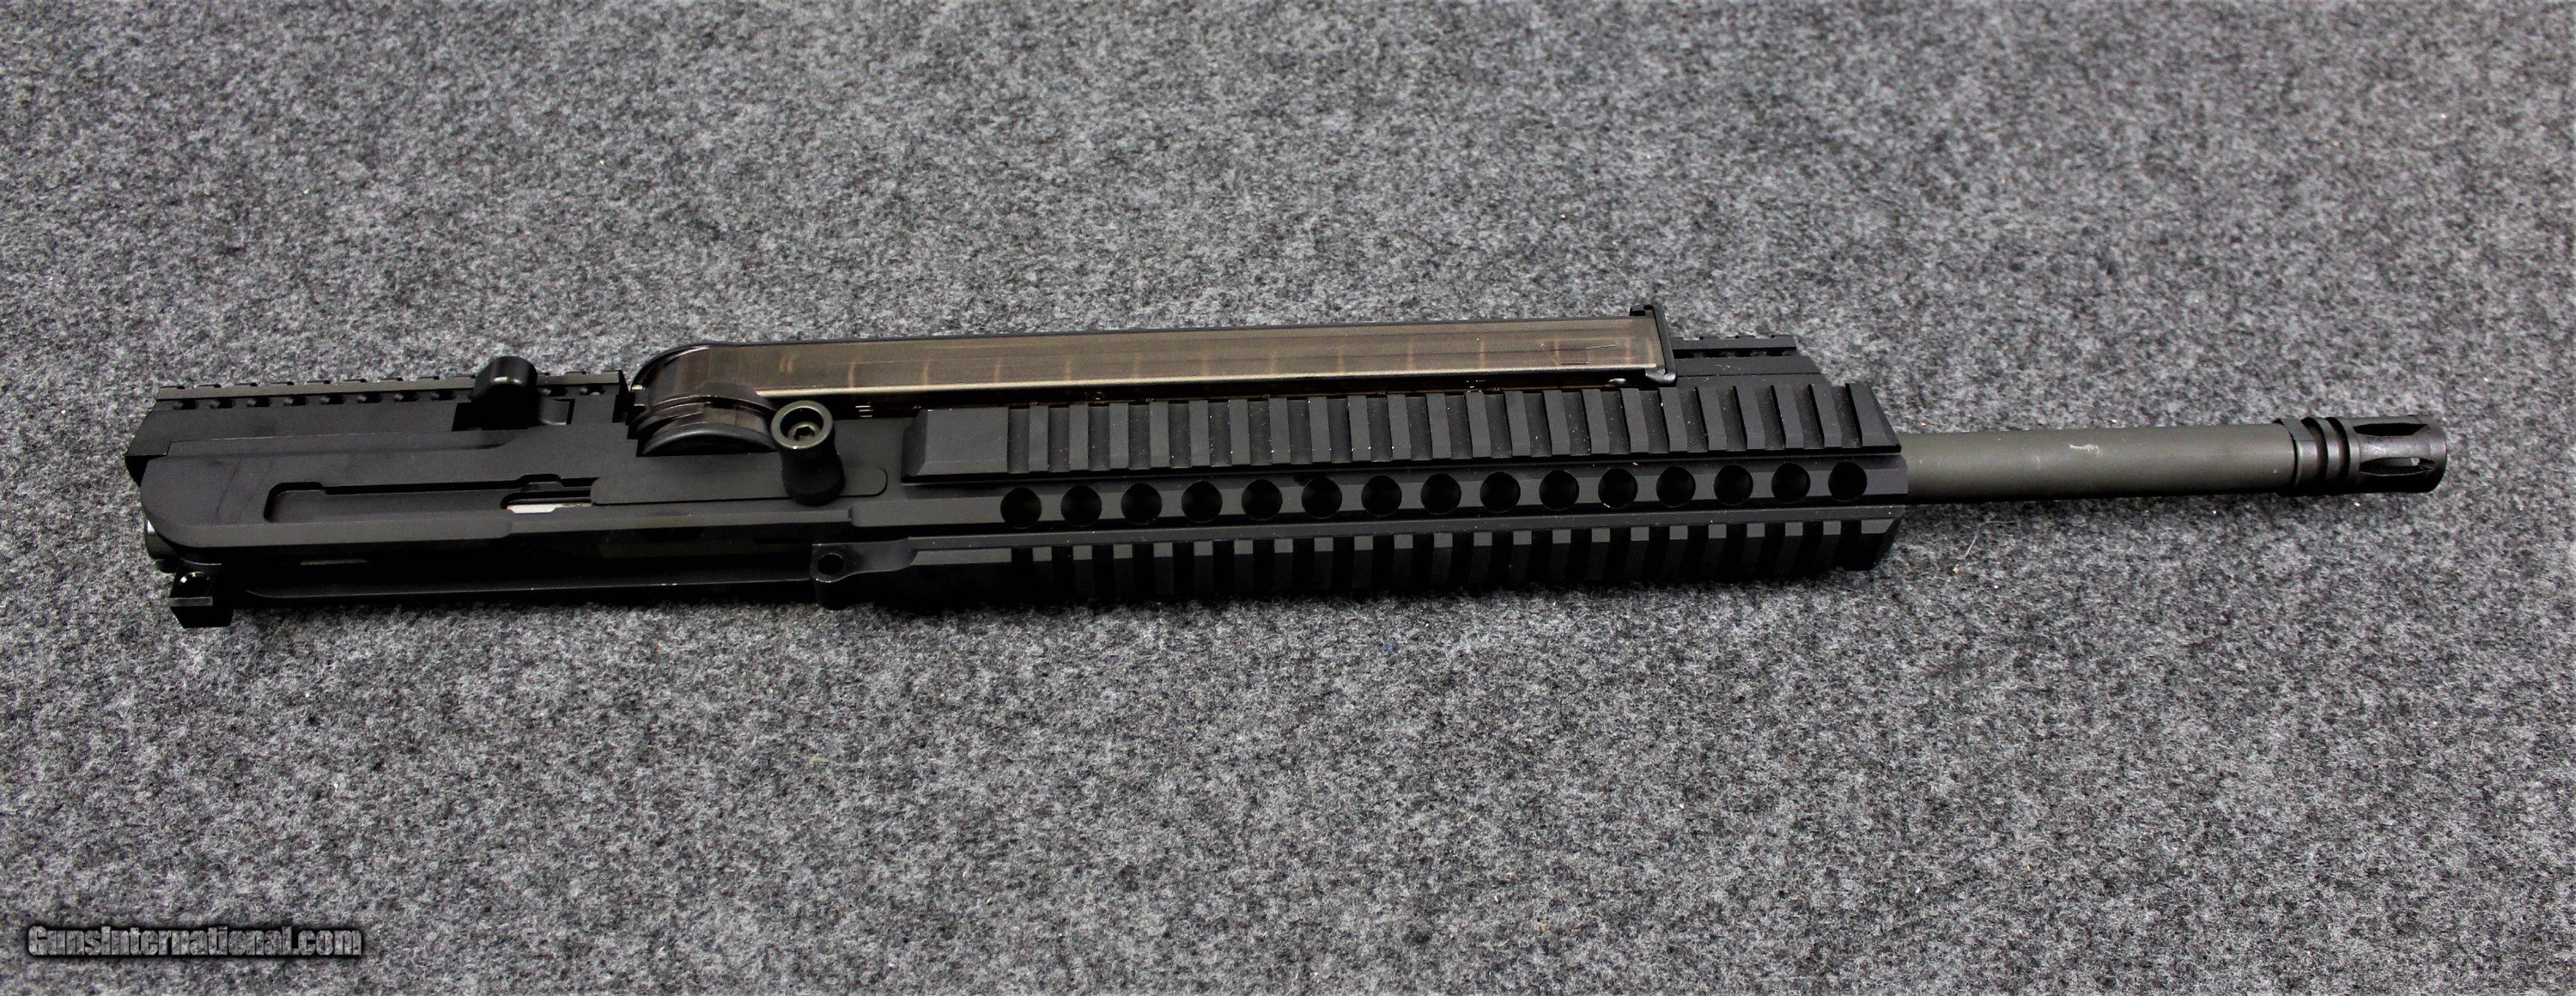 Ar57 Complete Upper In Caliber 5 7x28mm